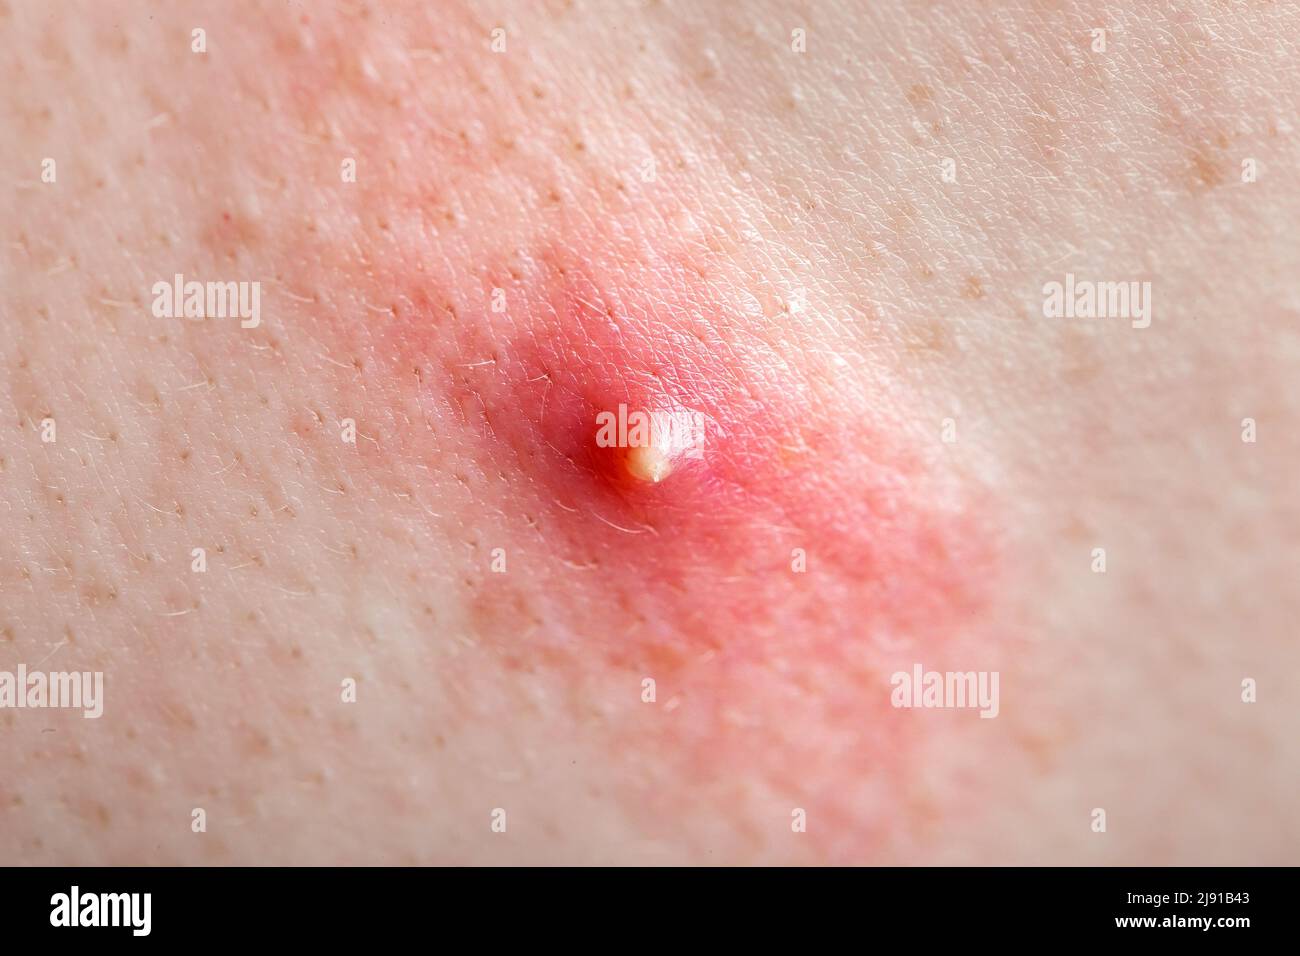 acne on inflamed human skin, teen body health and problems of red pimple  close-up texture of human skin Stock Photo - Alamy